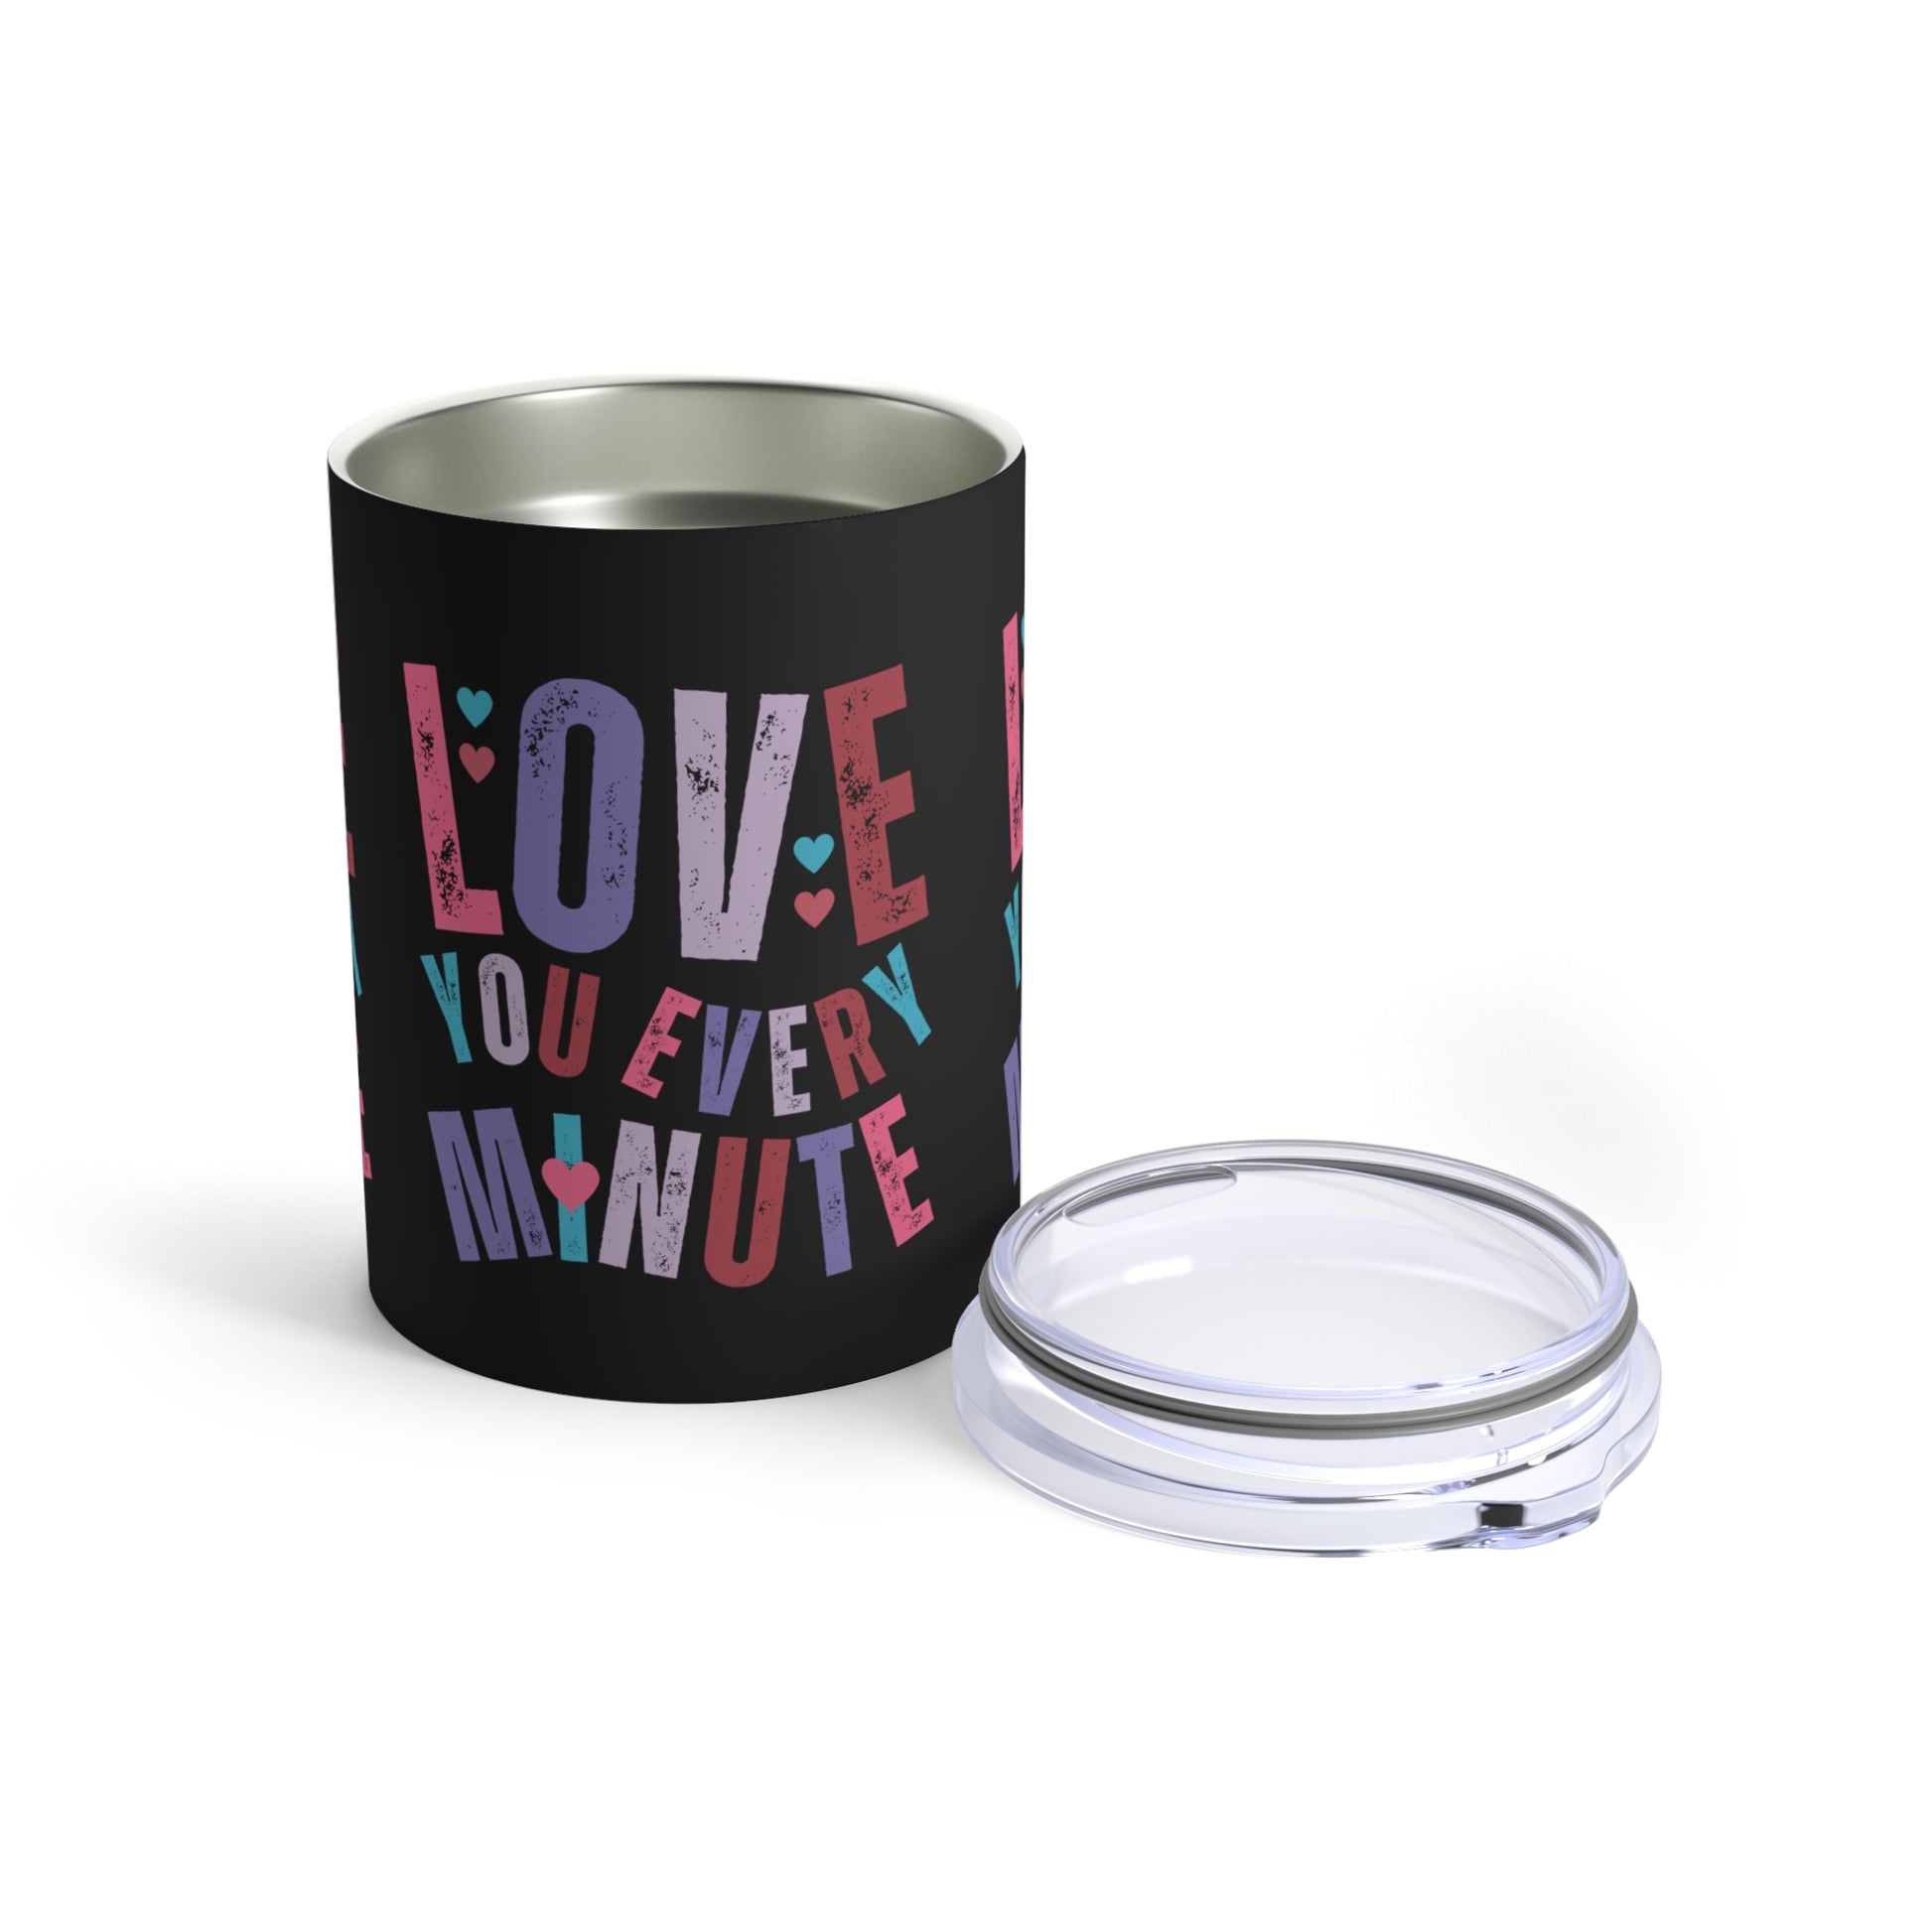 Love You Every Minute: 10 oz Stainless Steel Tumbler - Romantic and Insulated Sipper